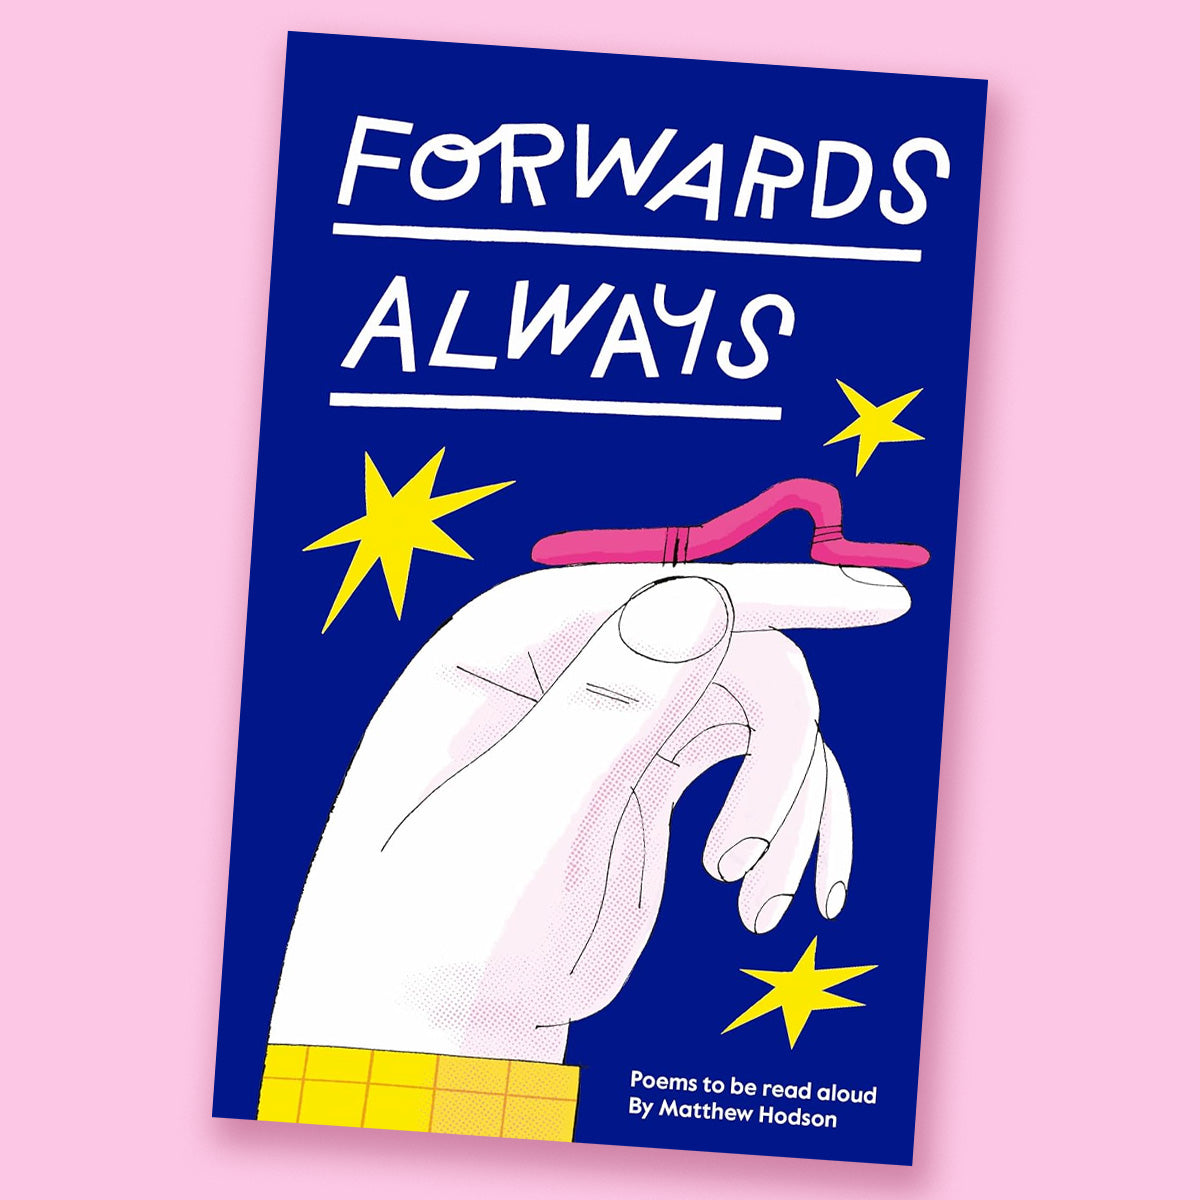 Forwards Always: Poems to be read aloud by Matthew Hodson